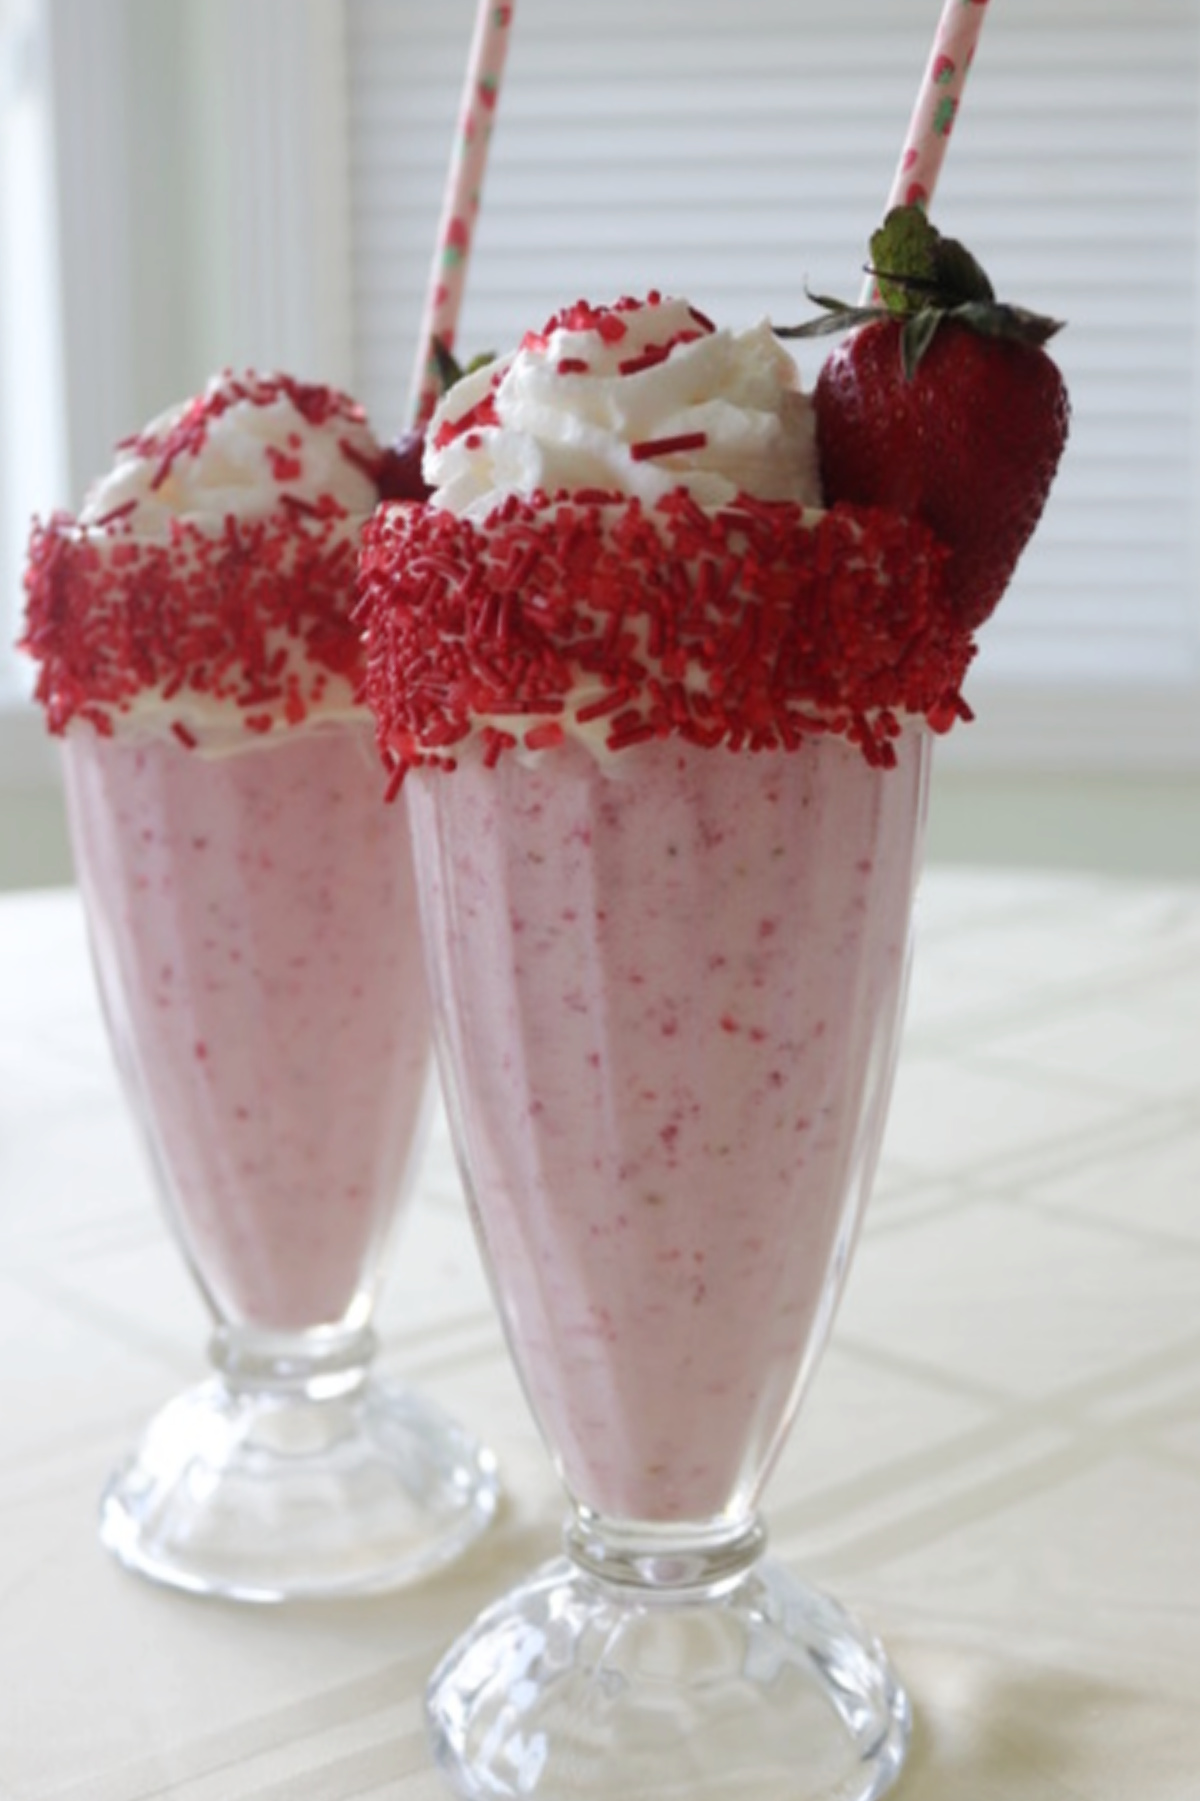 Two fresh strawberry milkshakes with whipped cream and sprinkles garnished with a strawberry.